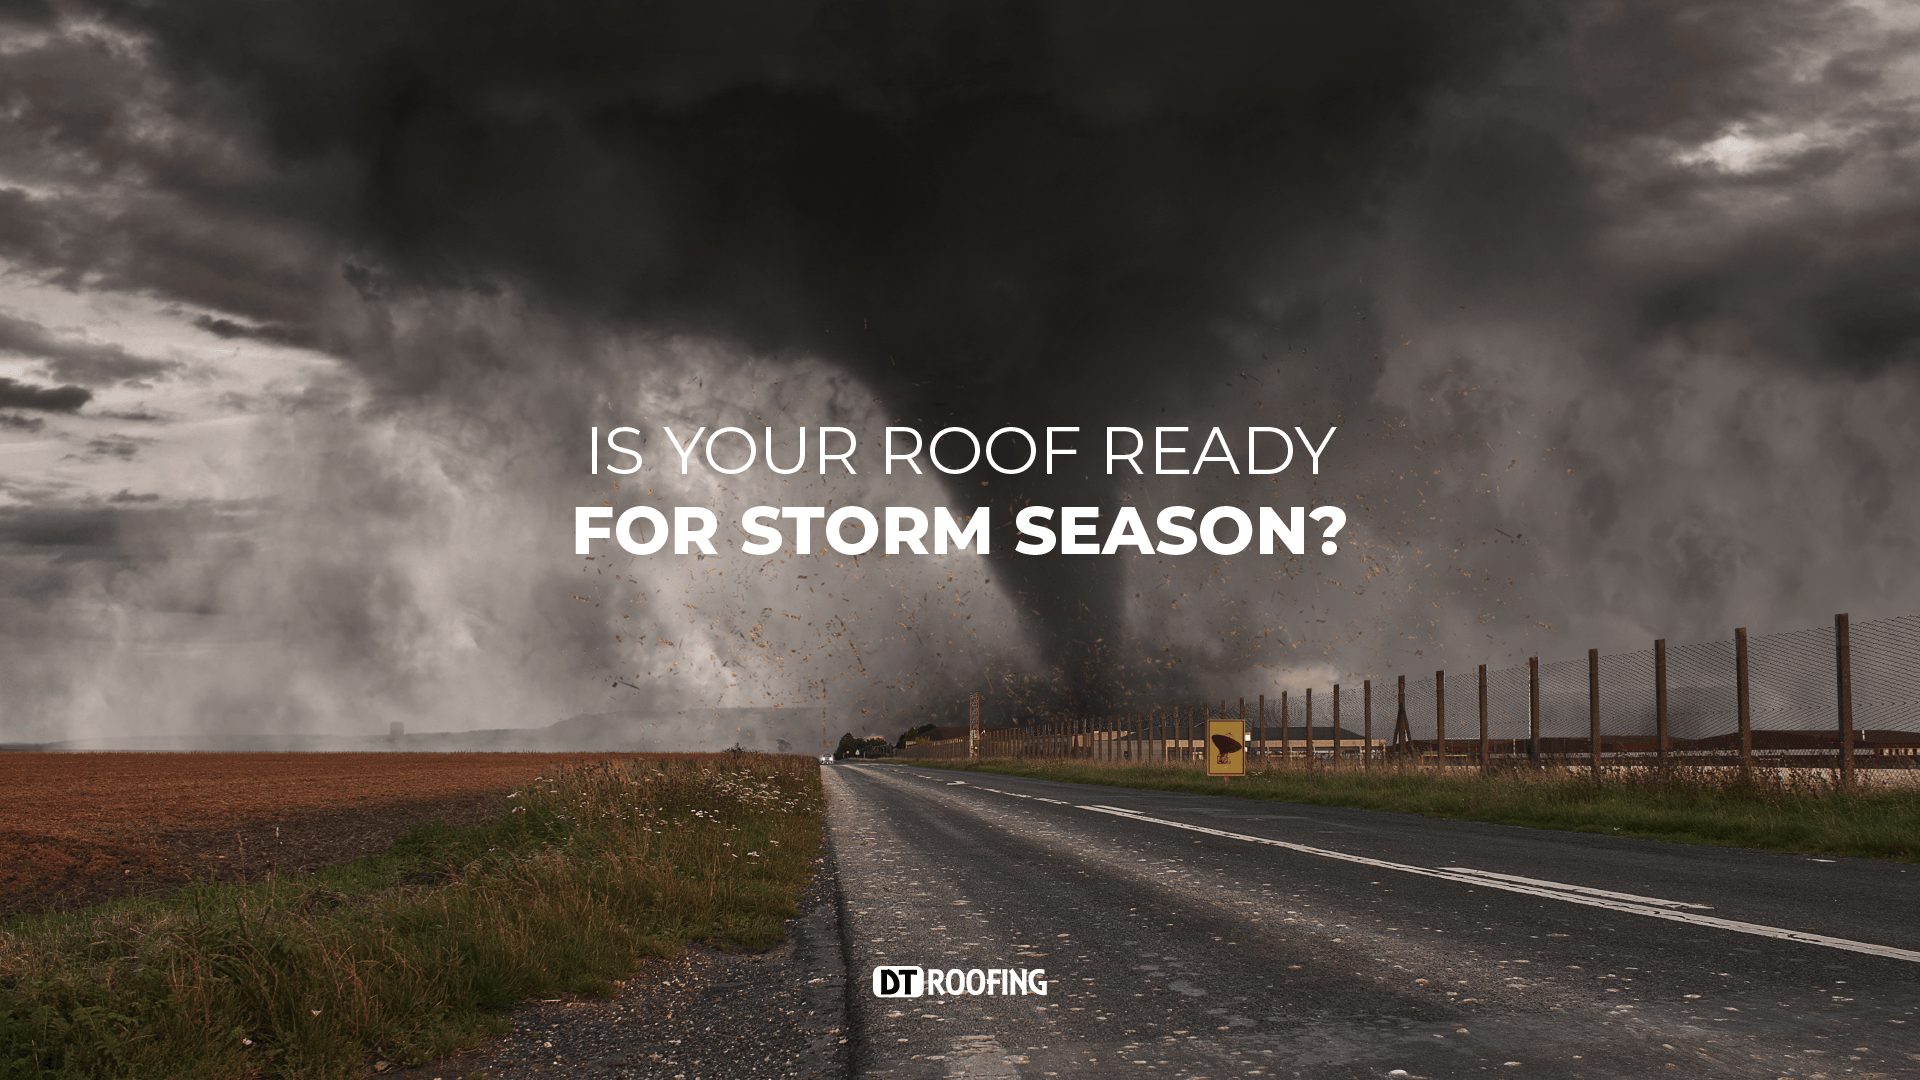 Assessing Your Roof's Readiness for Storm Season